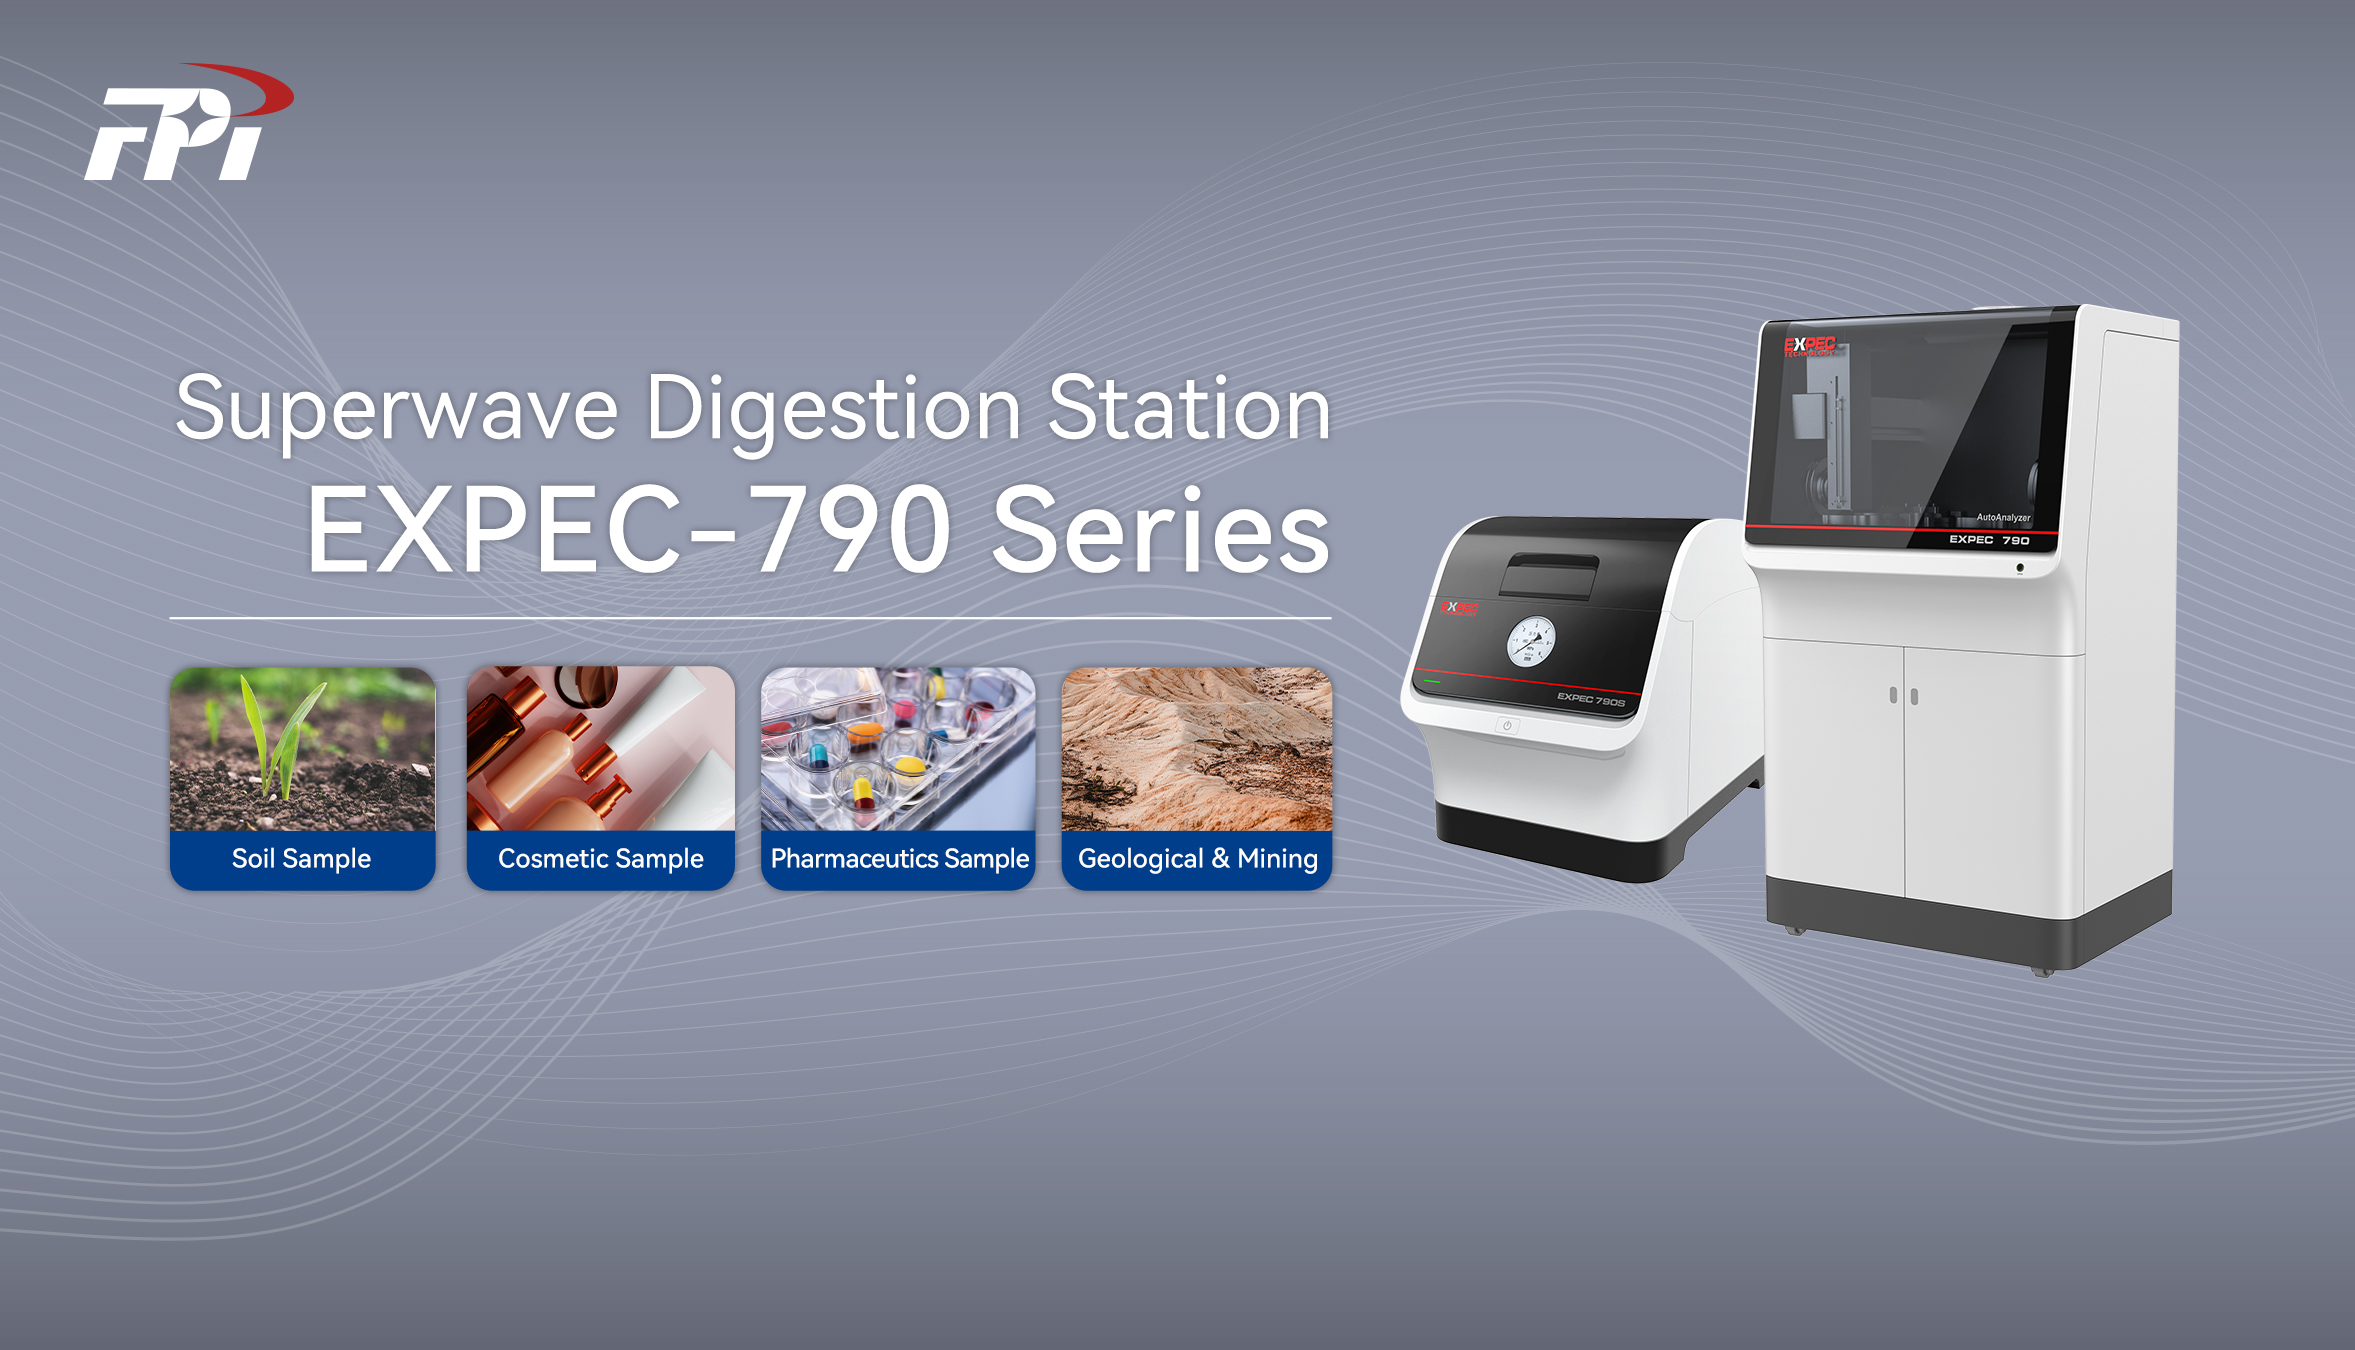 FPI Microwave Digestion Station Innovation Breakthrough Won Industry Recognition